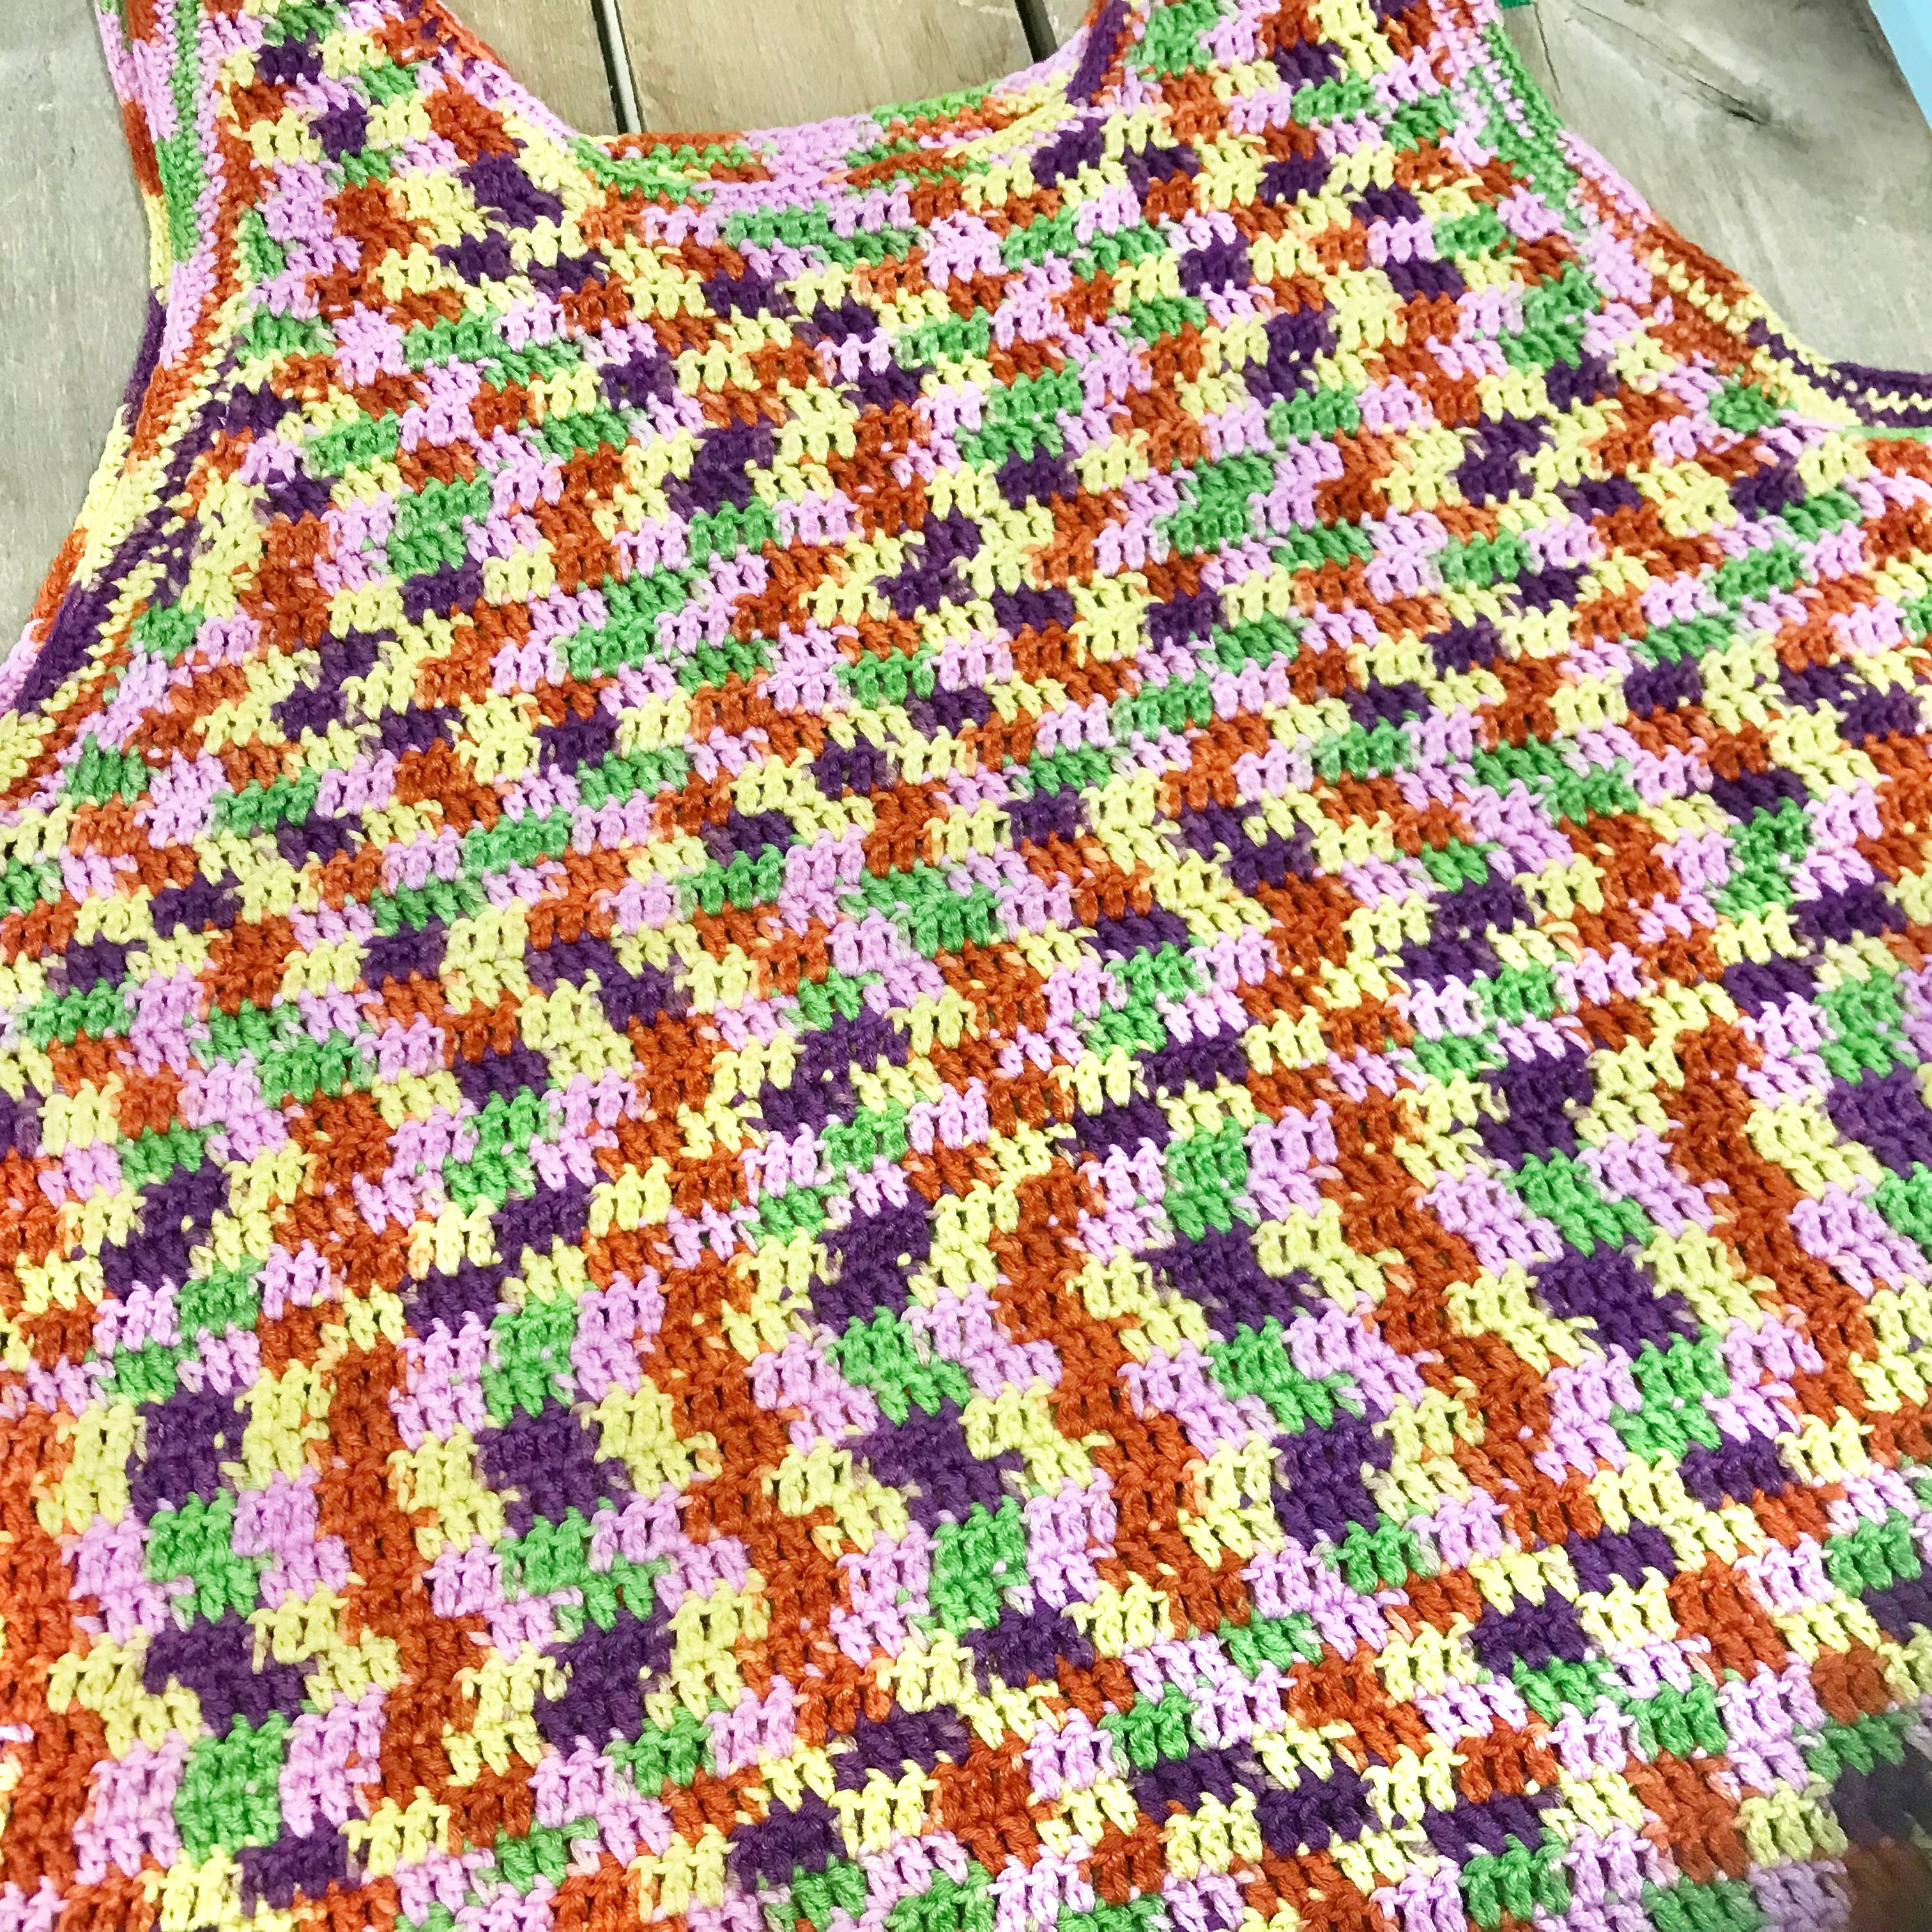 Crocheted locally - Singlet vest top **ON SALE**